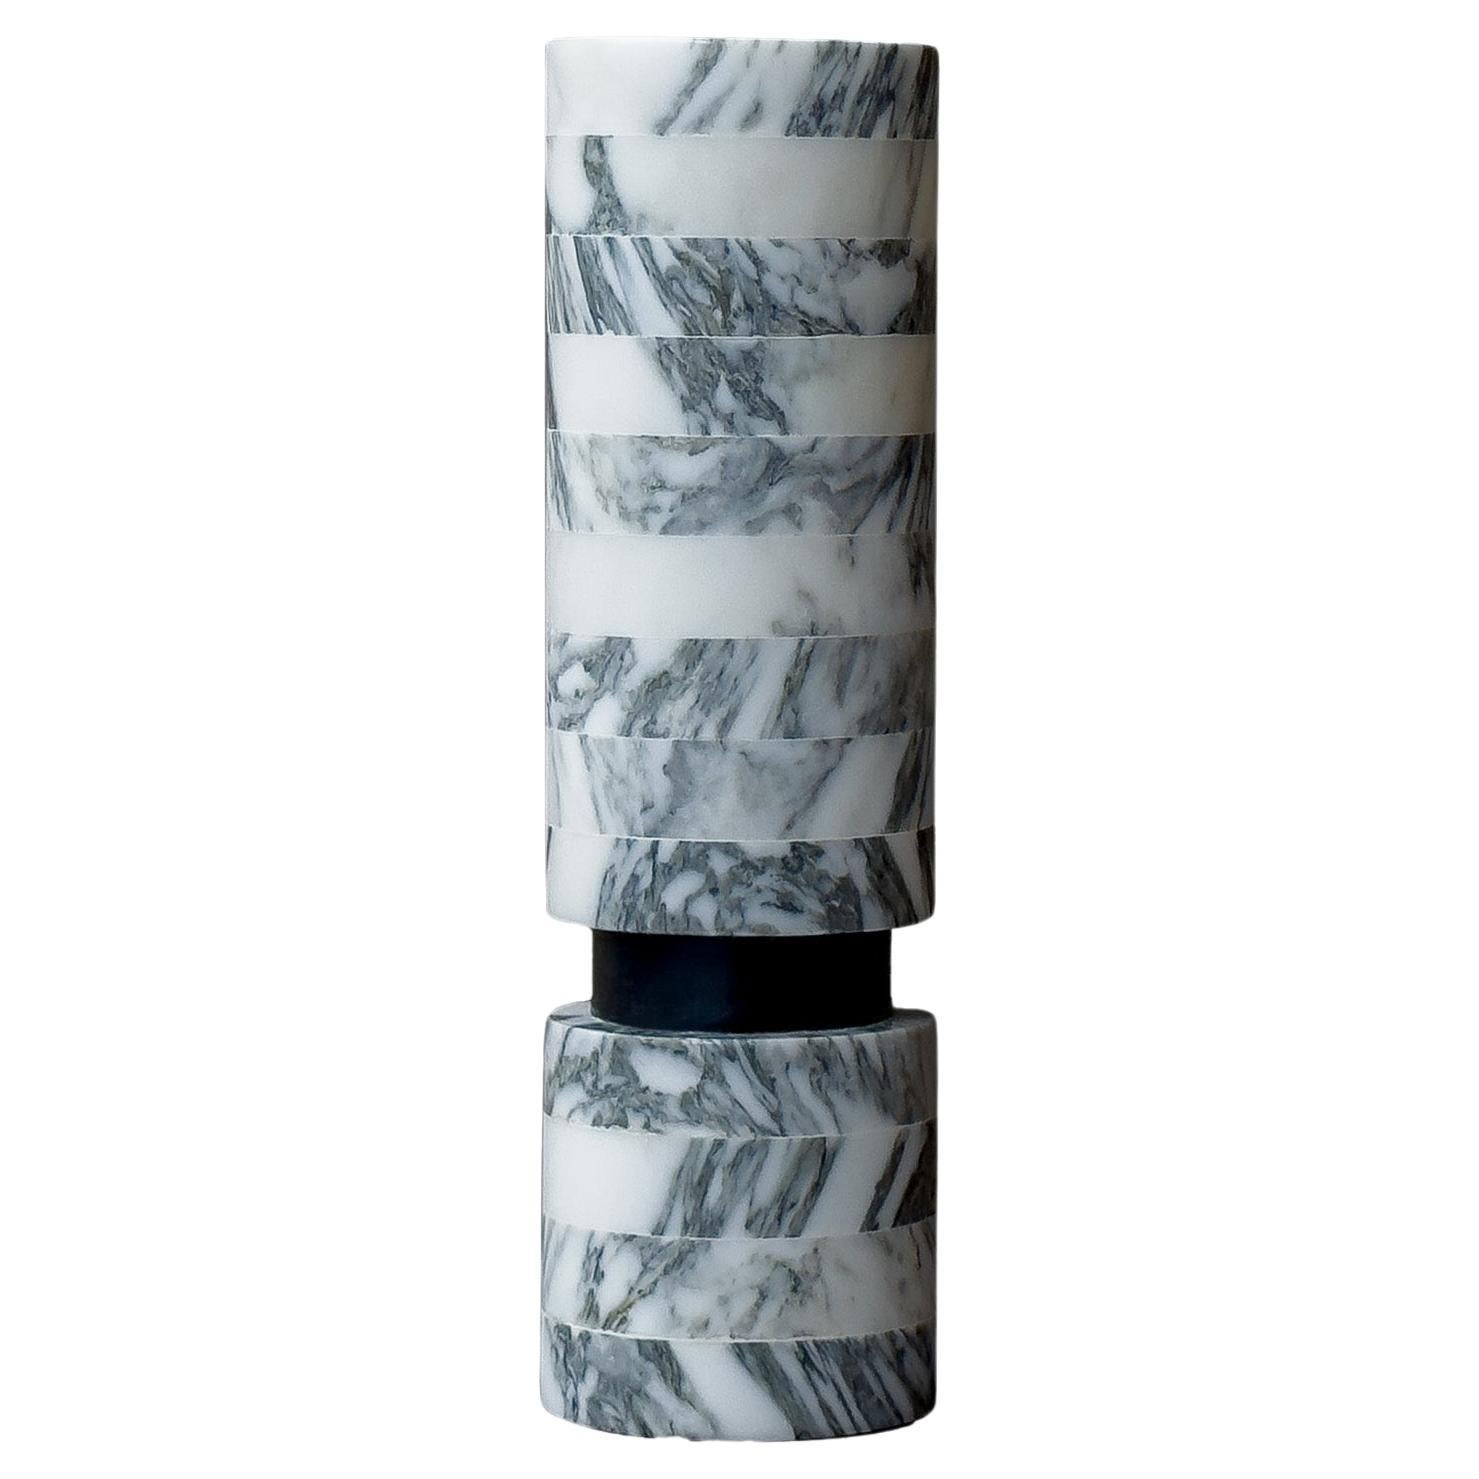 ZEBRANO Vase in Arabescato Marble by Meble Matters